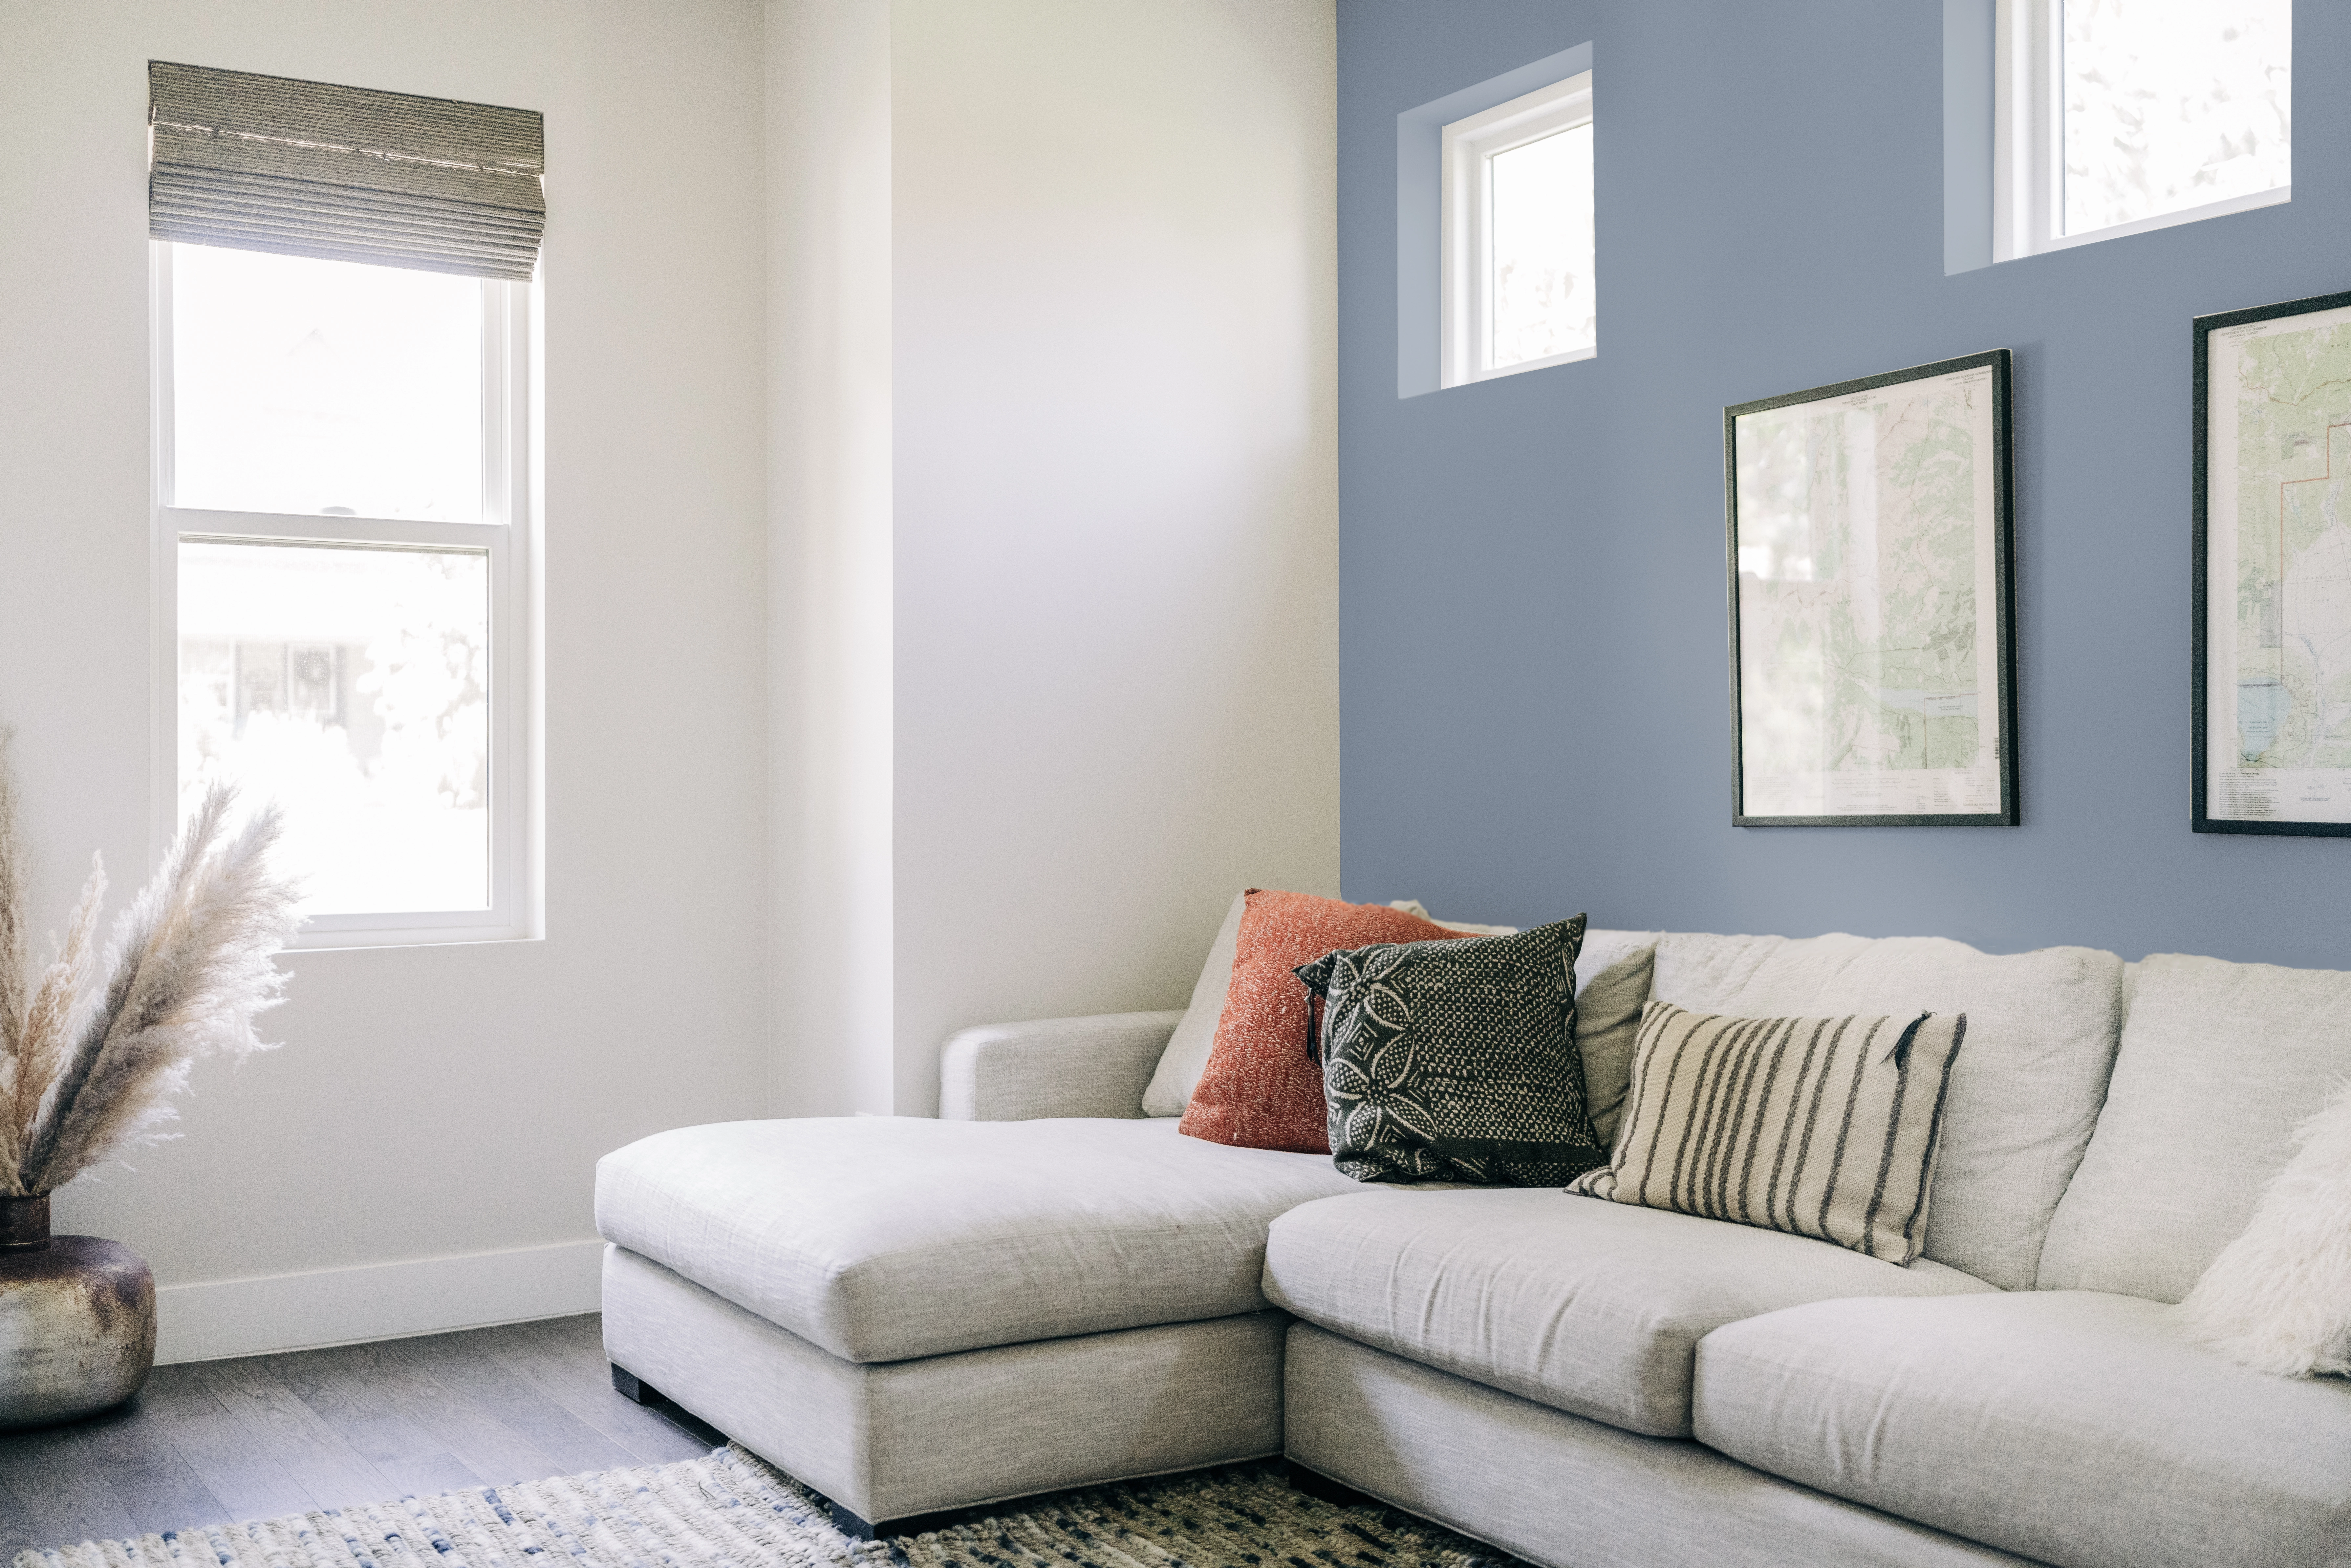 Modern style living room with gray blue accent wall, cream walls, white baseboards, and gray couch.